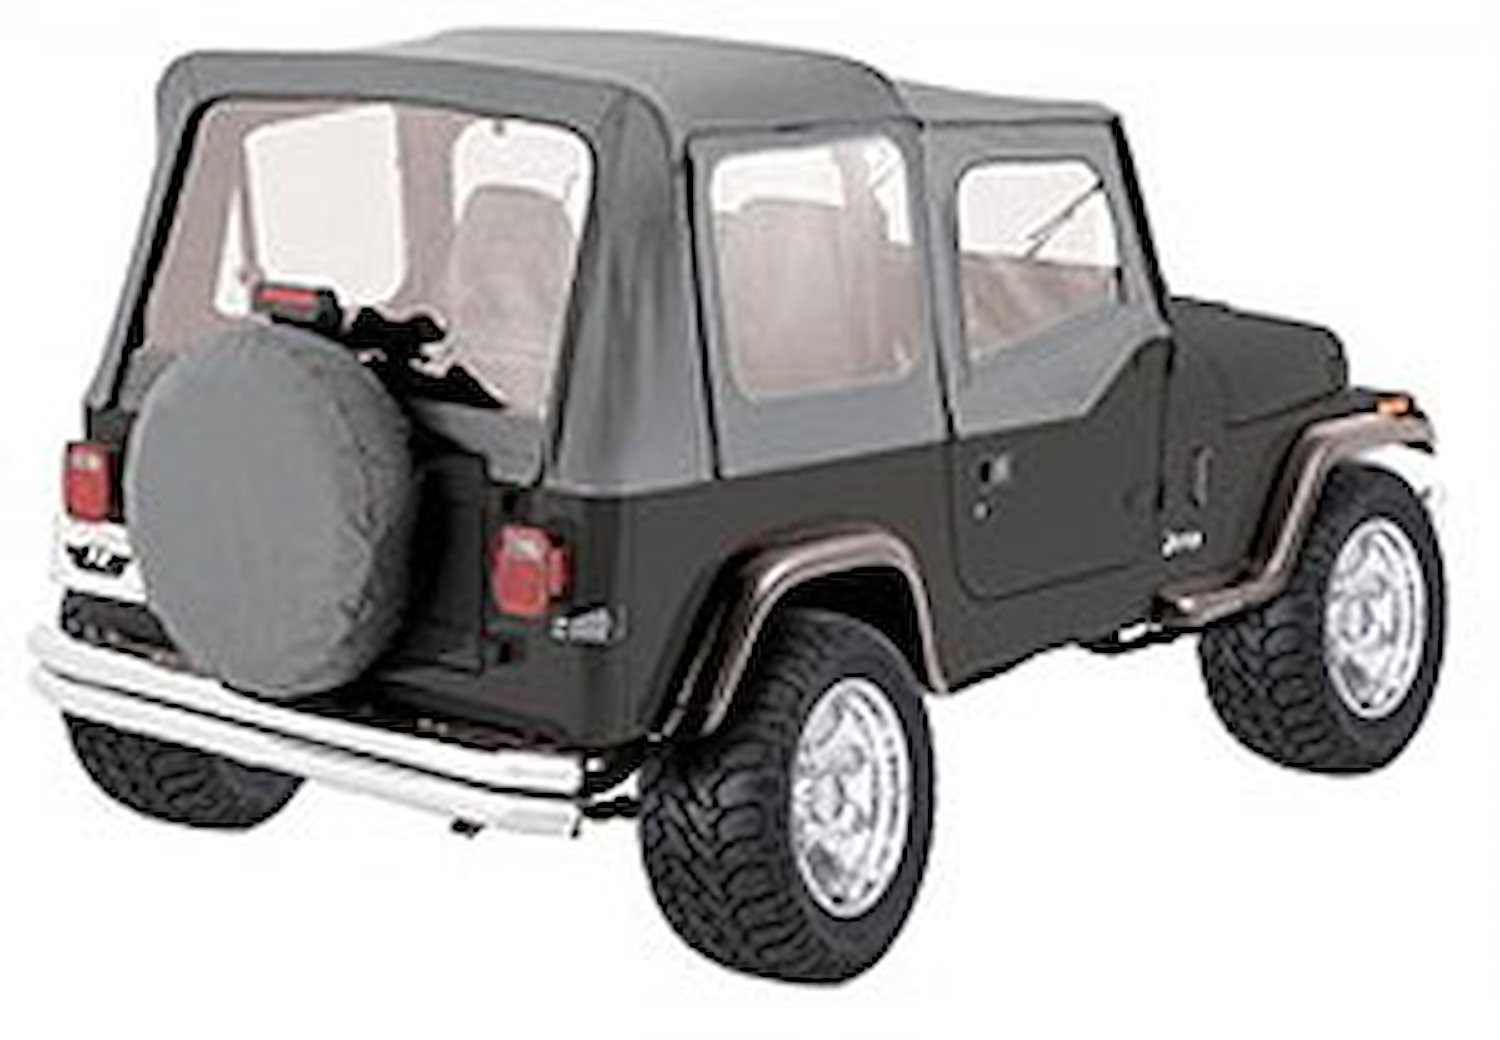 COMPLETE TOP FRAME AND HARDWARE 87-95 JEEP WRANGLER WITH SOFT UPPER DOORS GRAY DENIM